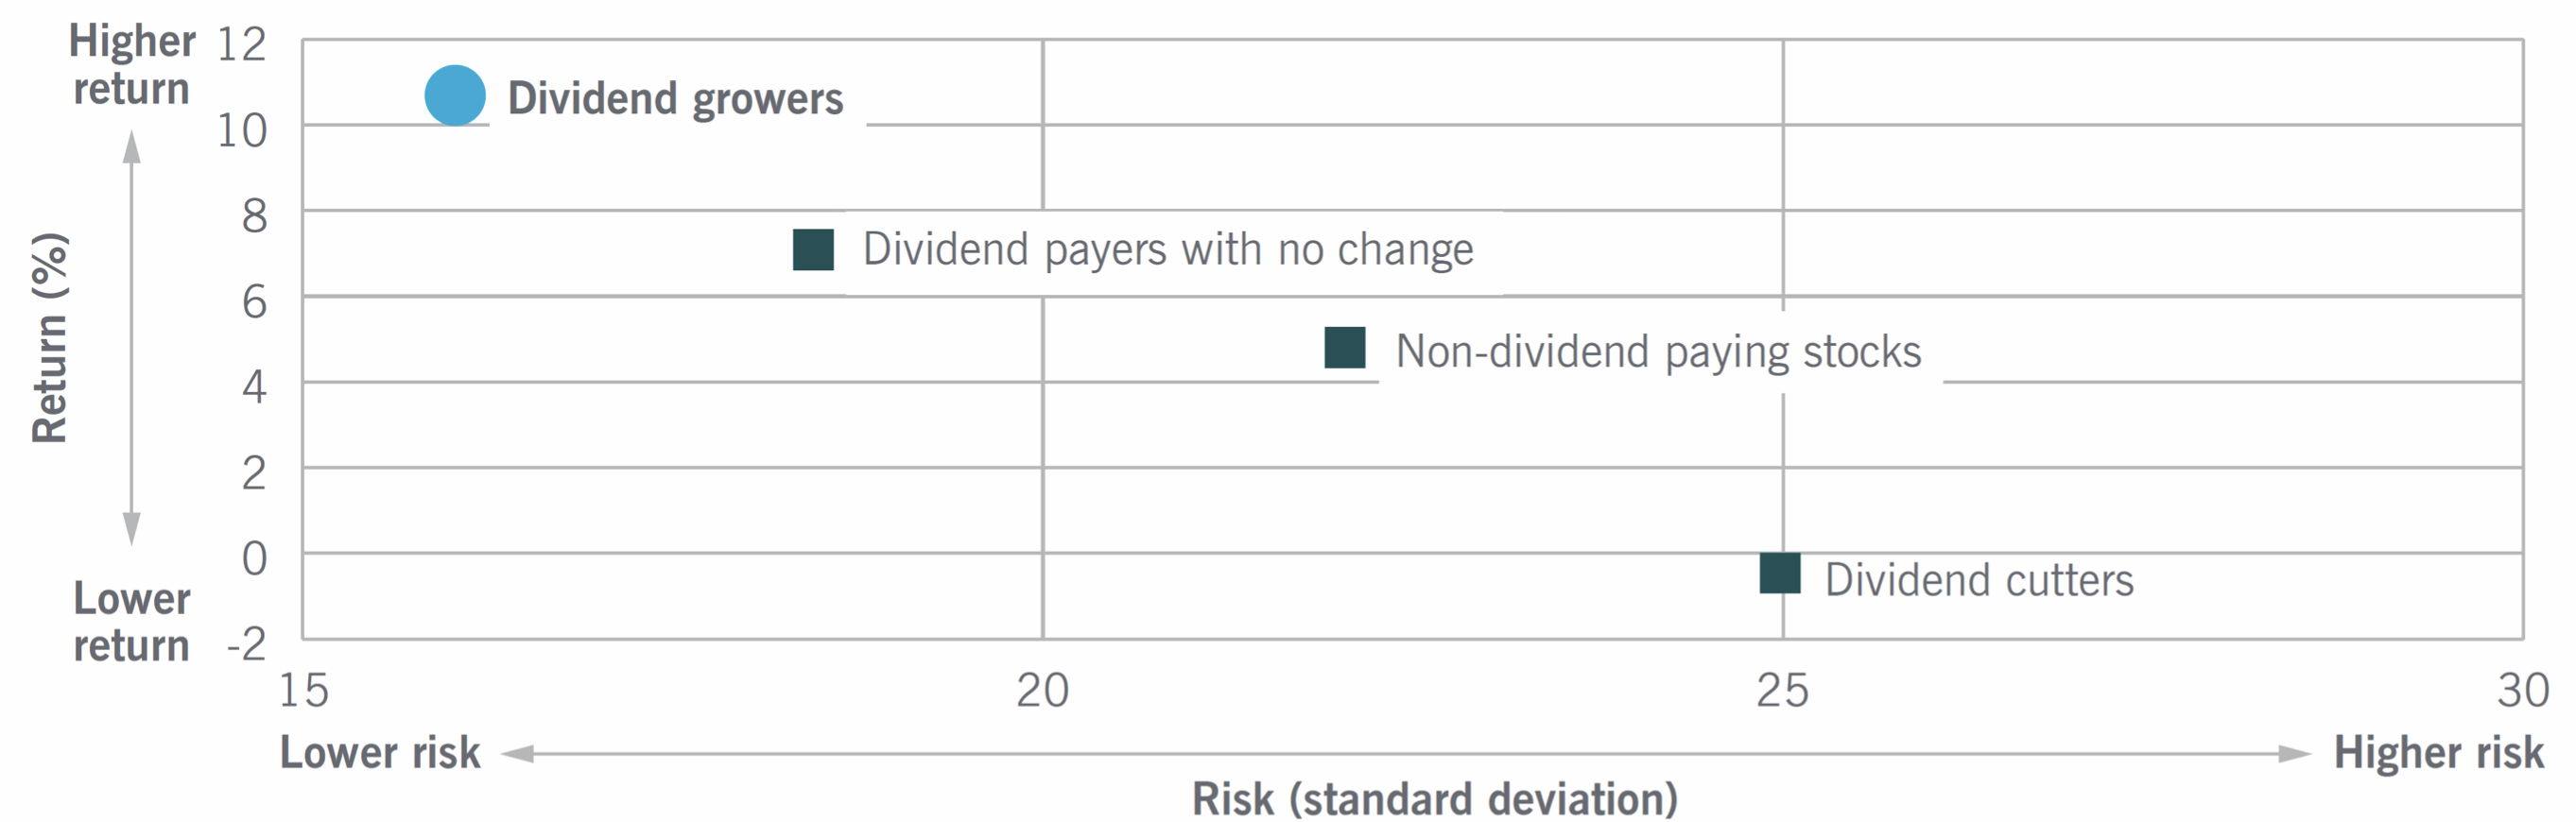 Risk-Adjusted Returns of S&P 500 Index Stocks by Dividend Policy